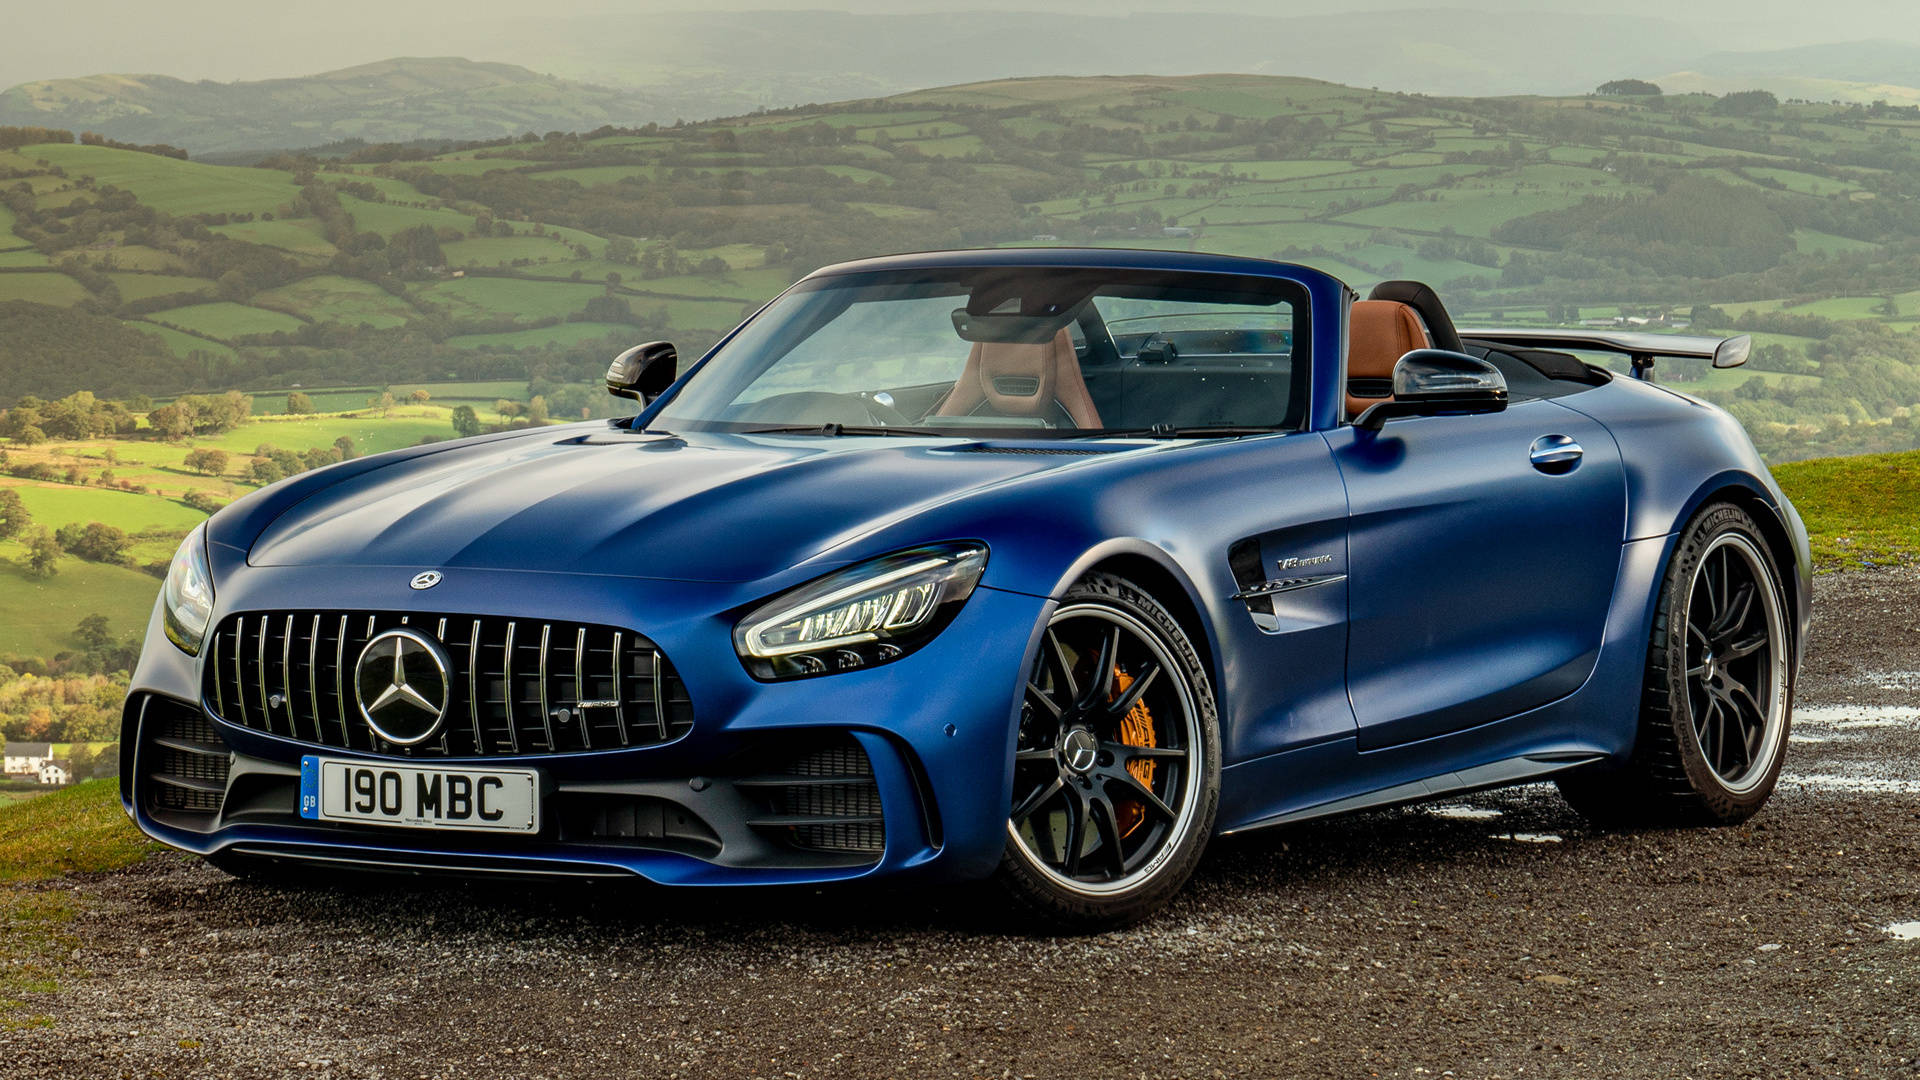 Stunning Blue Convertible Mercedes-amg Gt R Background